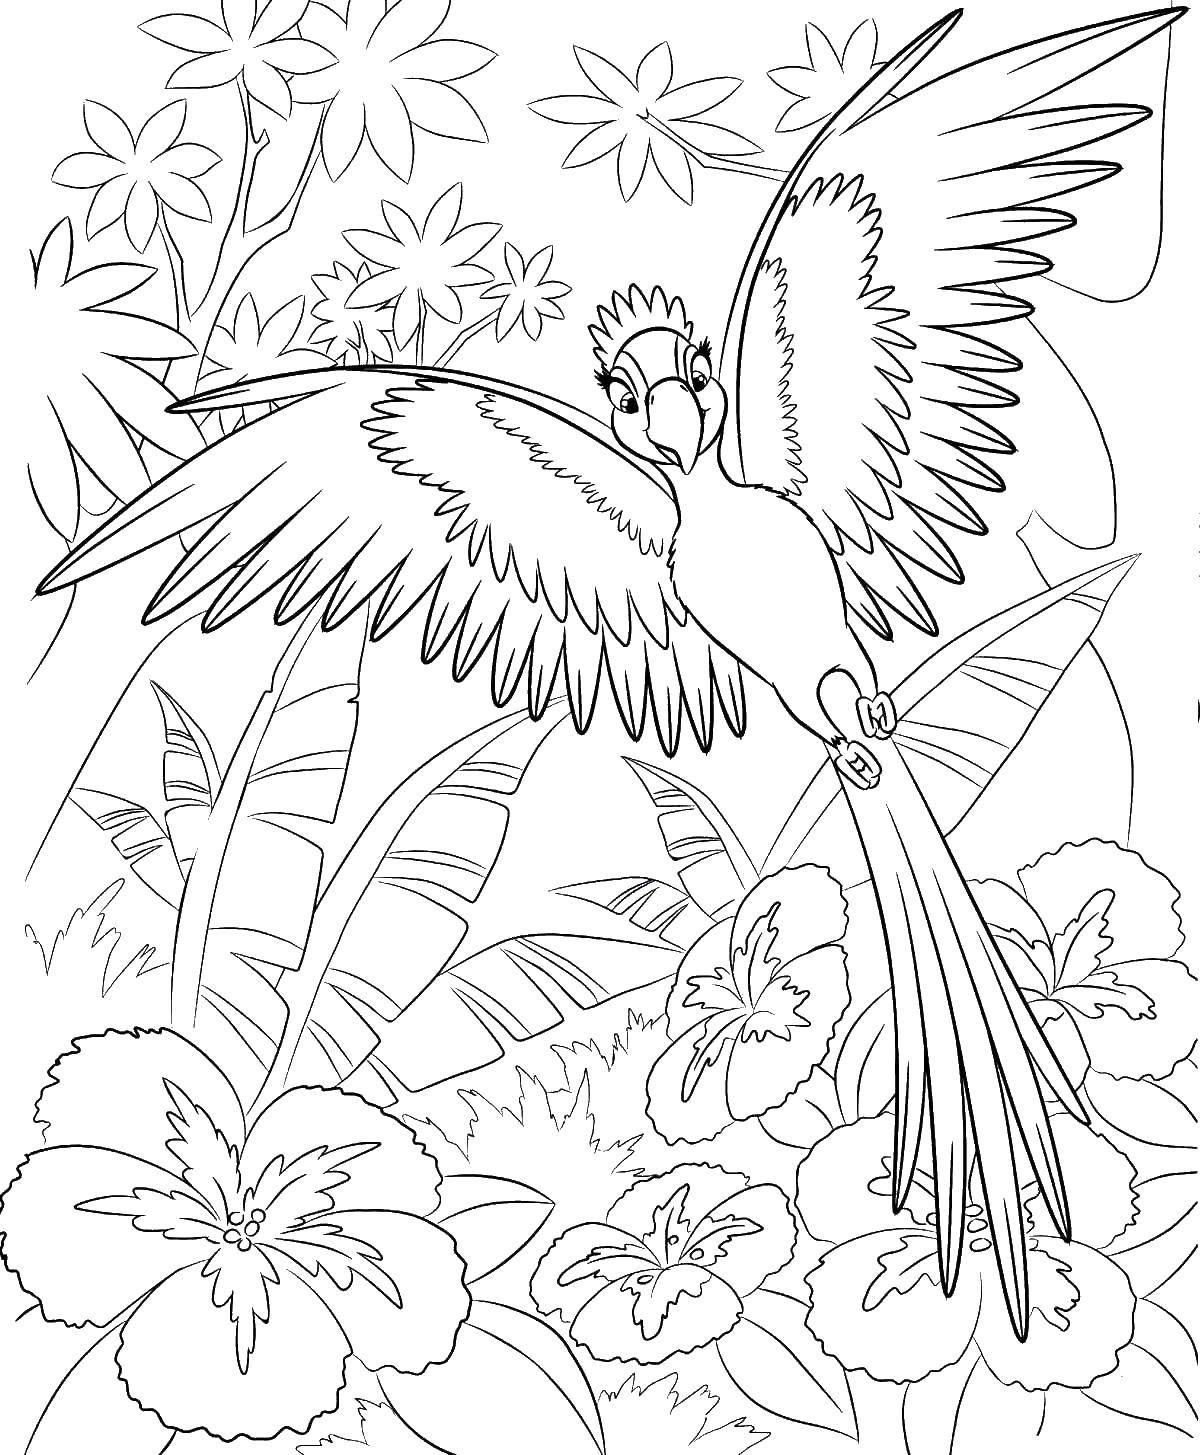 Coloring Soaring over the forest parrot. Category parakeet. Tags:  parrots, forest, birds.